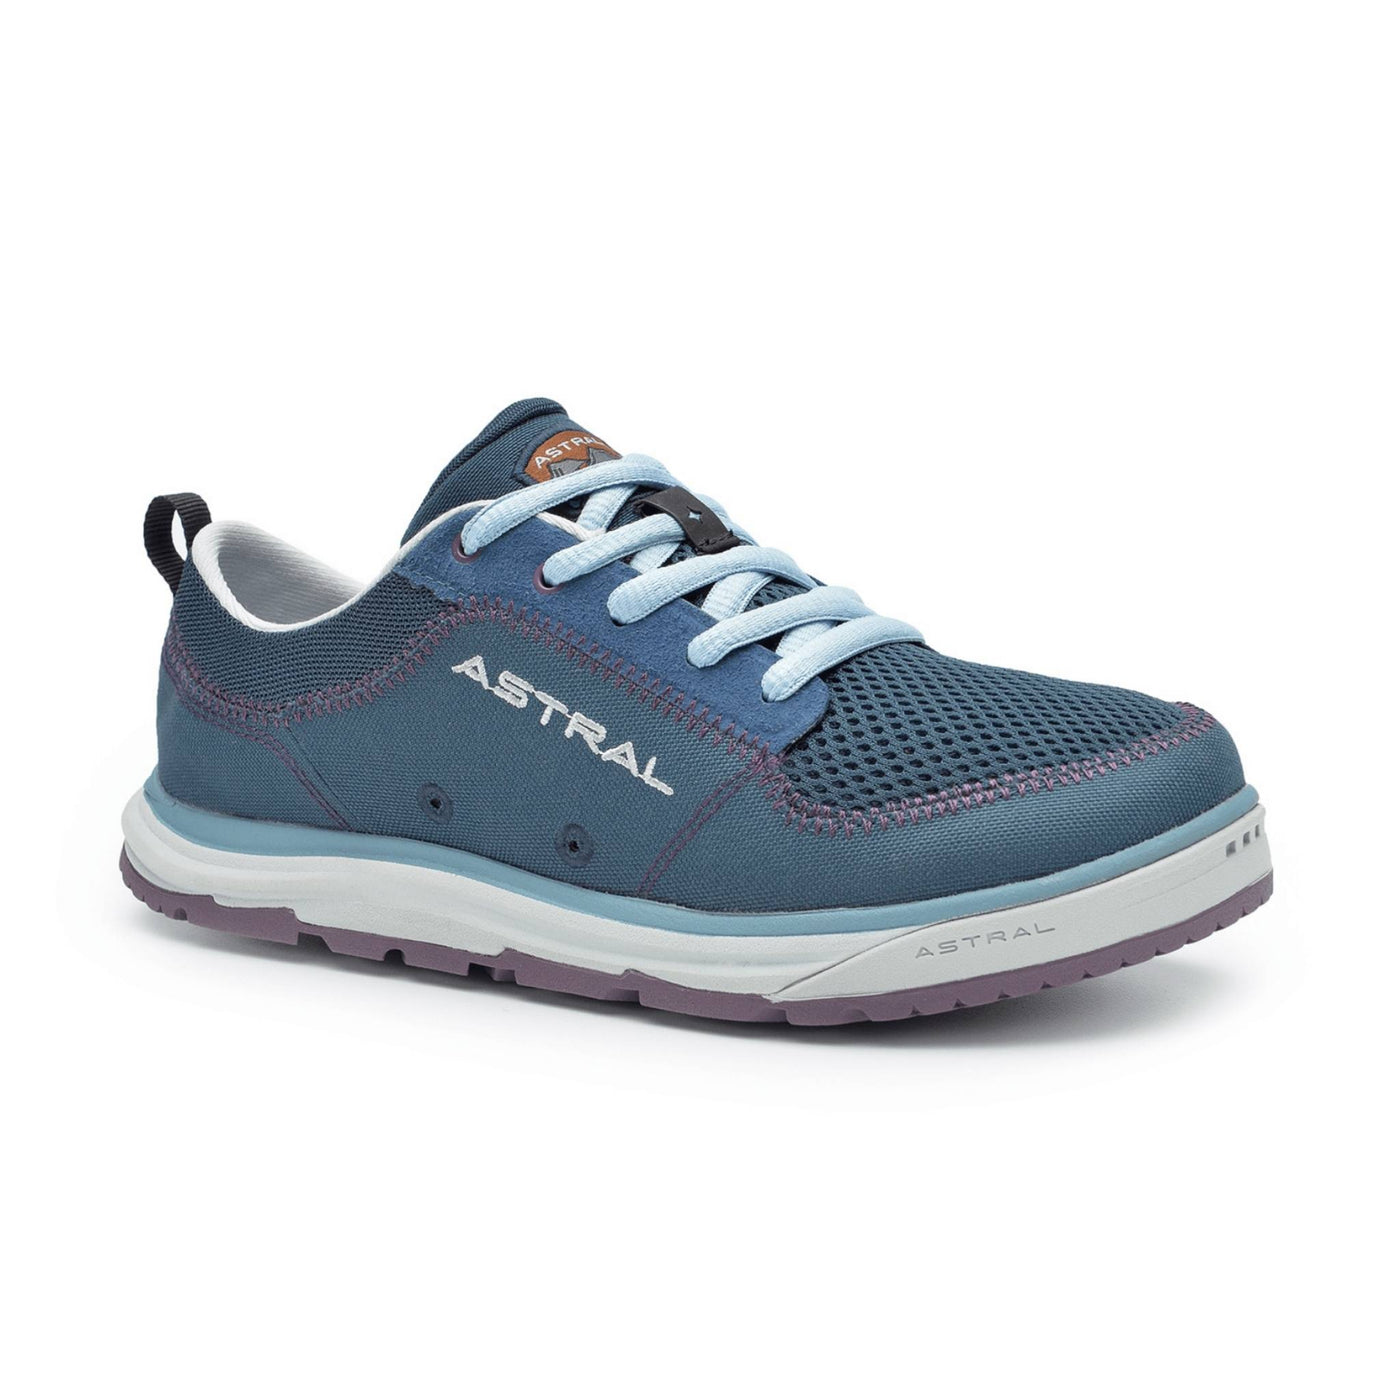 Astral Brewess 2.0 Women's Shoe | Astral NZ | River shoe | Further Faster Christchurch NZ #deep-water-navy